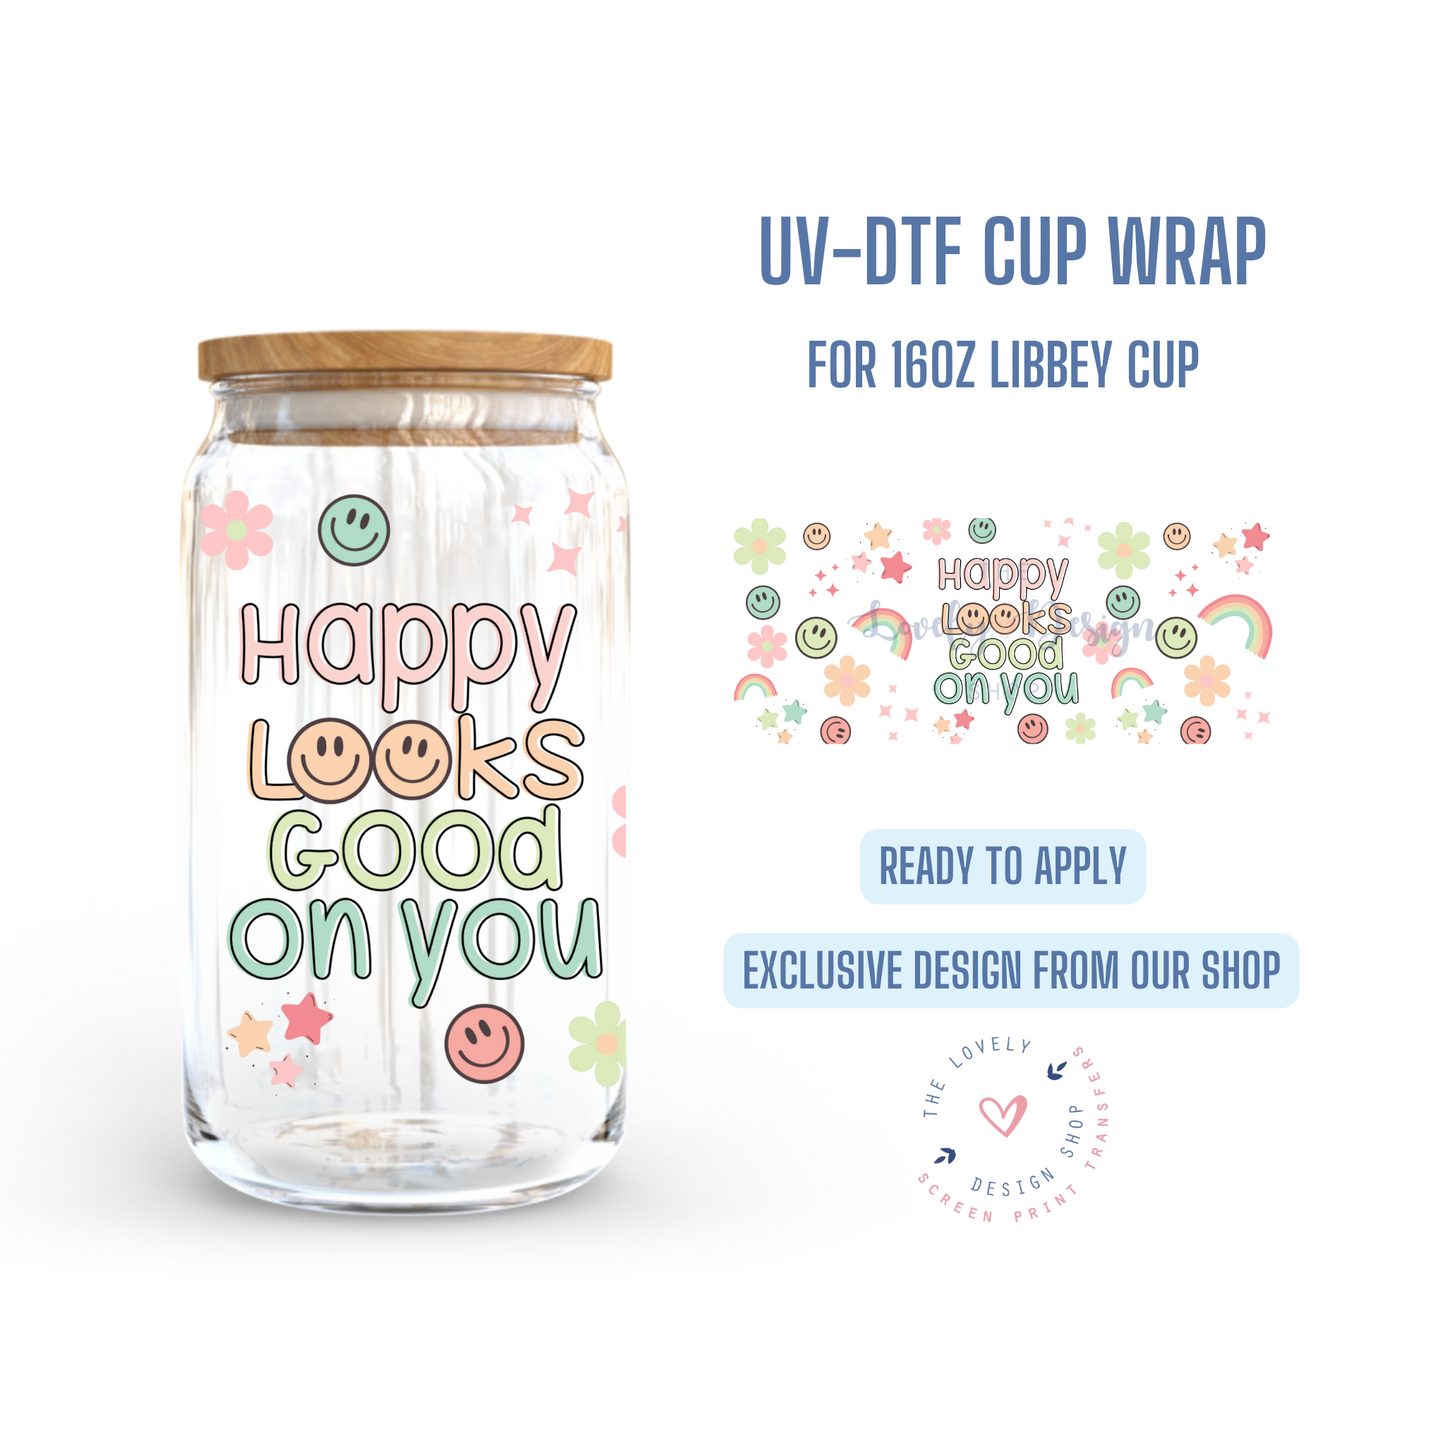 Happy Looks Good on You - UV DTF 16 oz Libbey Cup Wrap (Ready to Ship)